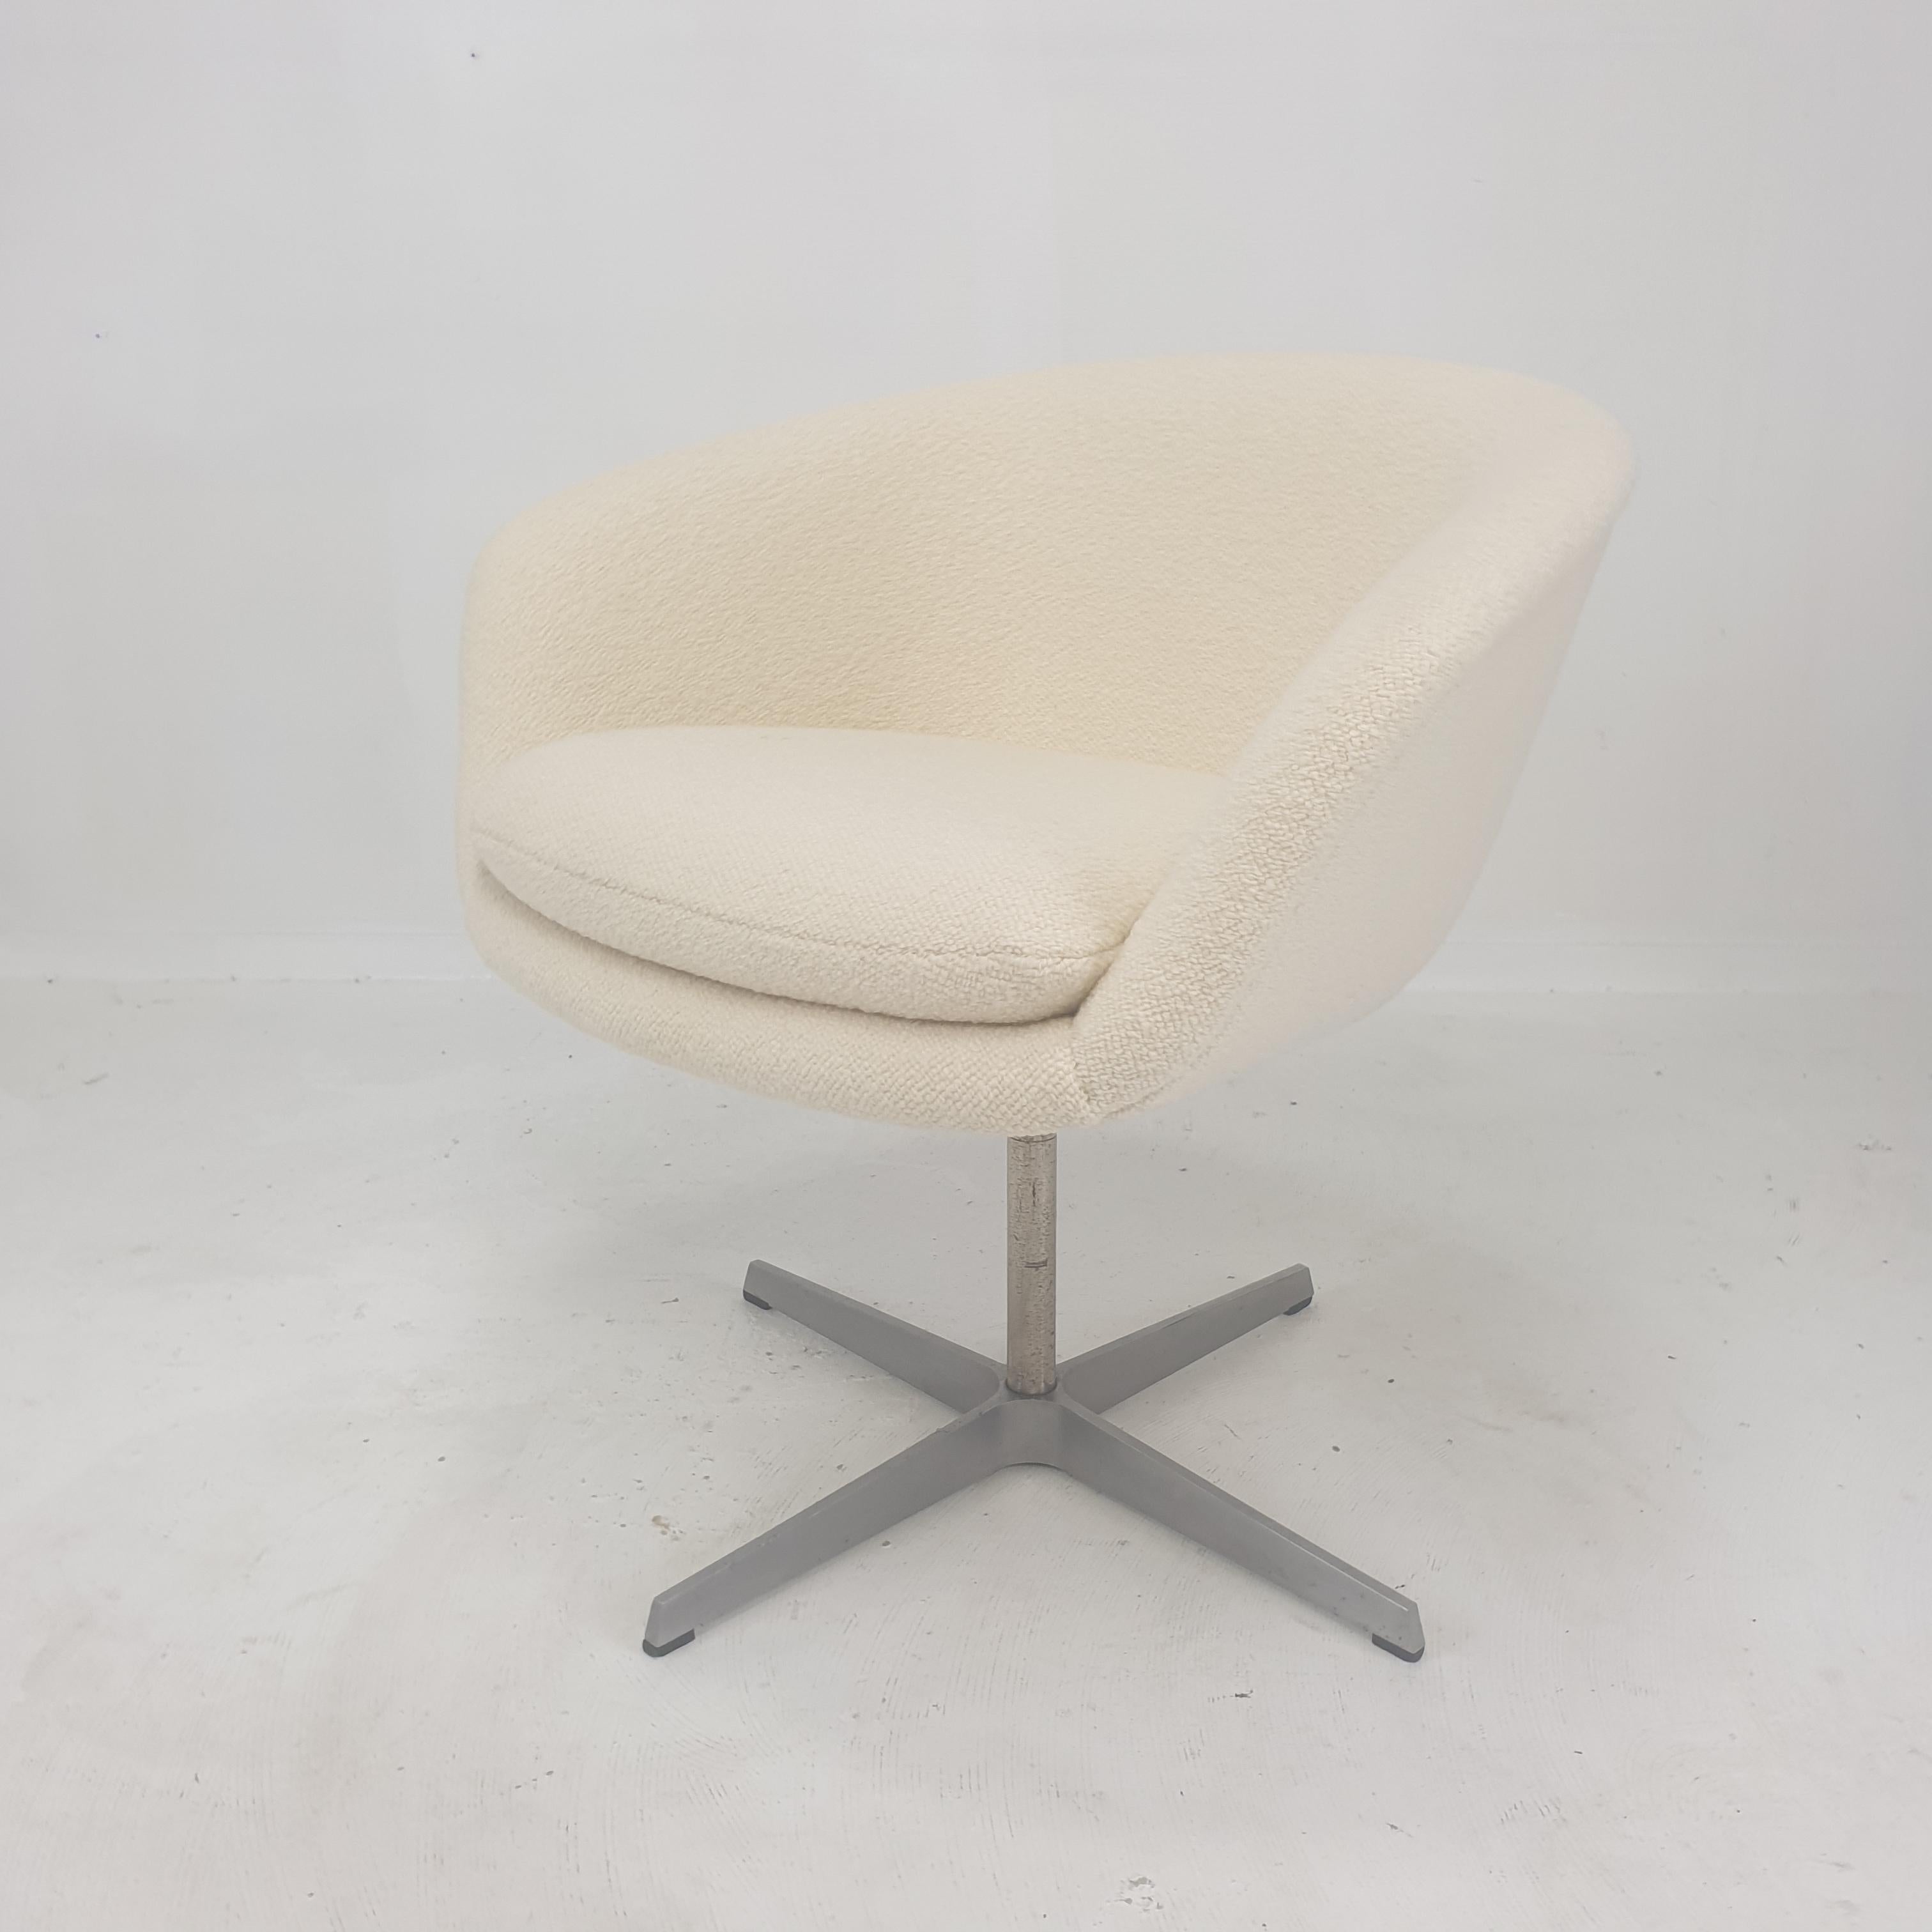 Very cute desk- or armchair.
This extremely rare chair is designed by Pierre Paulin and manufactured by Artifort in the 60's. 

The nicely shaped seat with the soft cushion makes the chair very comfortable.

It has been restored by a Pierre